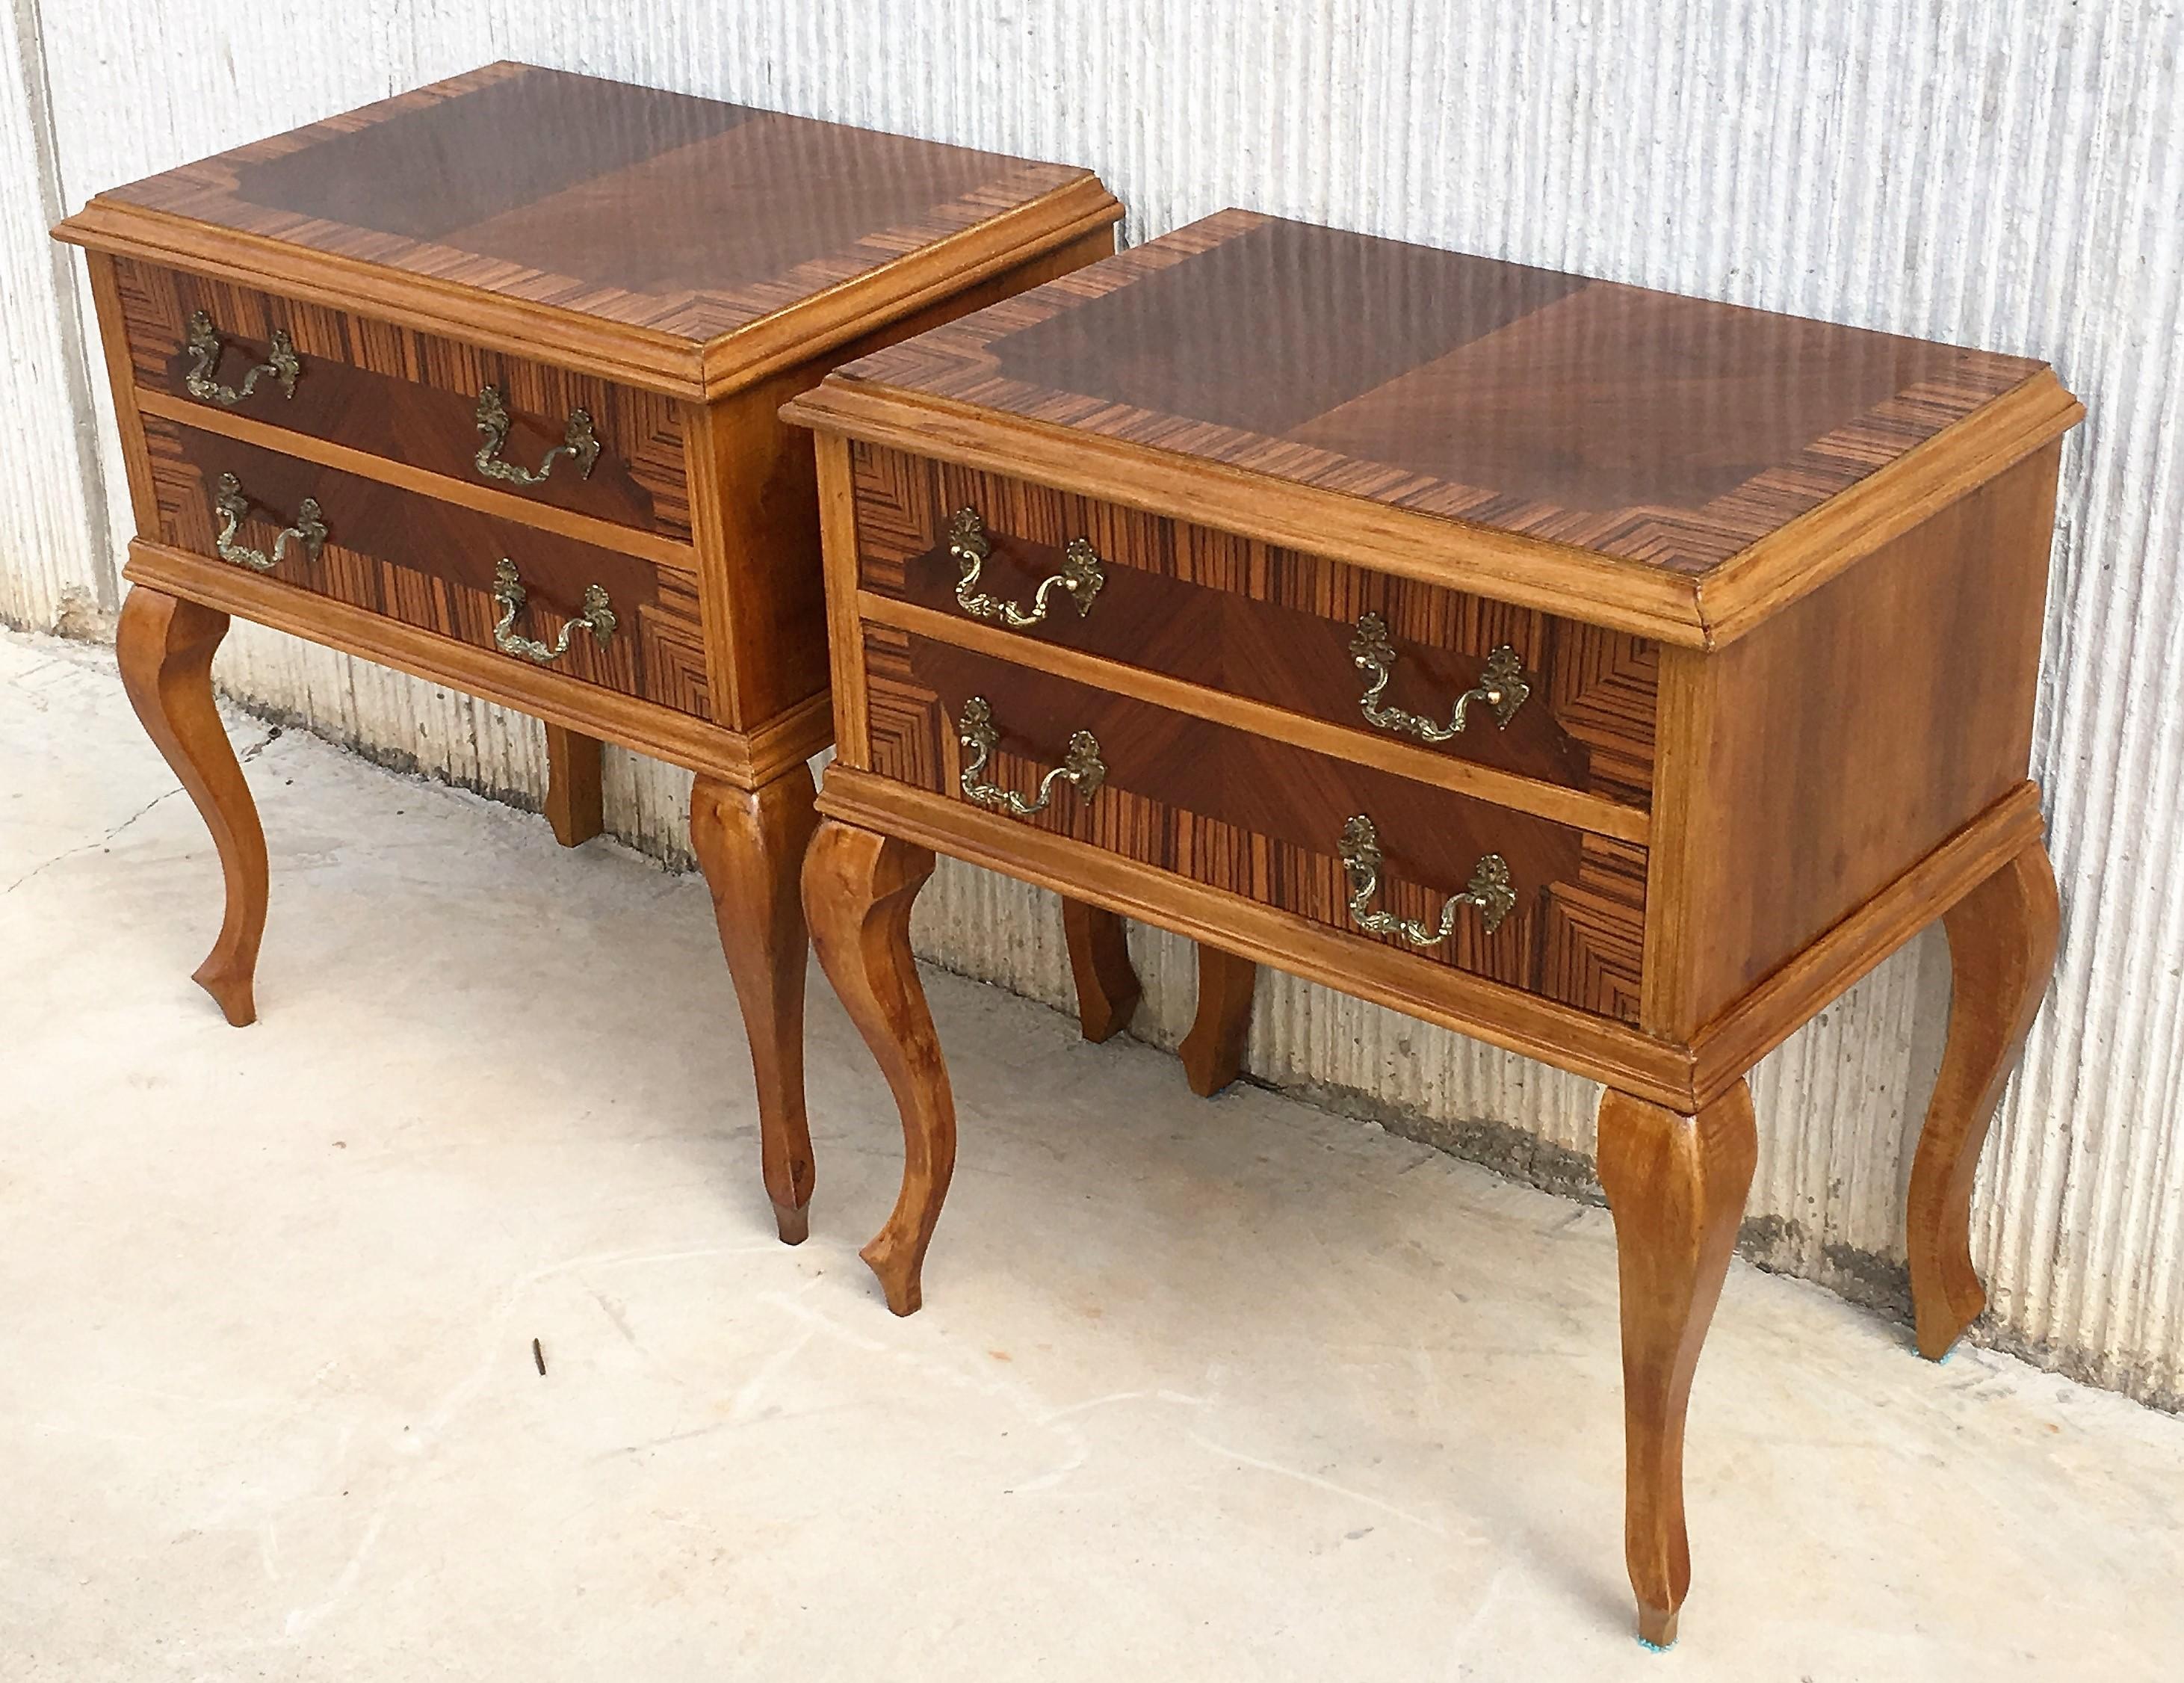 20th century pair of Mid-Century Modern nighstands with two drawers.